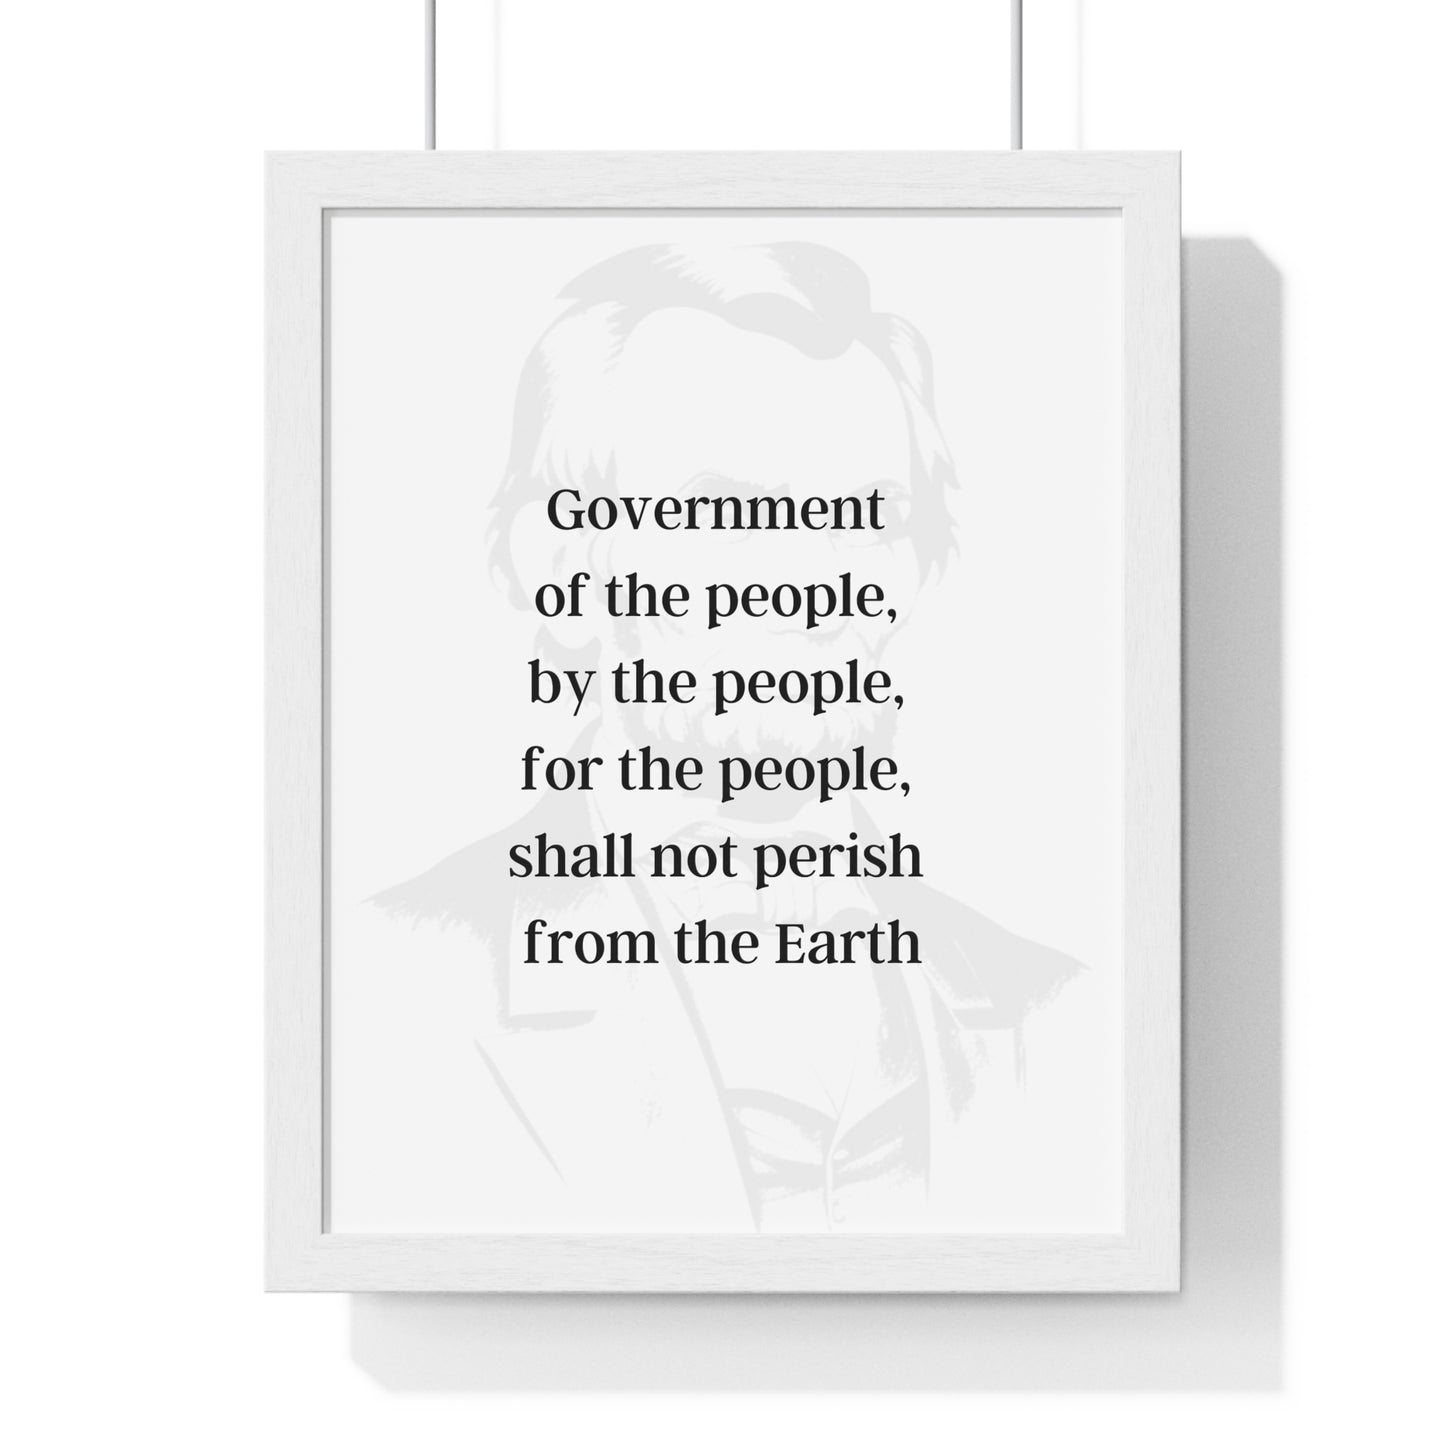 Abraham Lincoln Quote 4, Poster Art, Light Print with Black Lettering, 16th President of the United States, American Patriots, AI Art, Political Art, Poster Prints, Presidential Portraits, Presidential Quotes, Inspirational Quotes